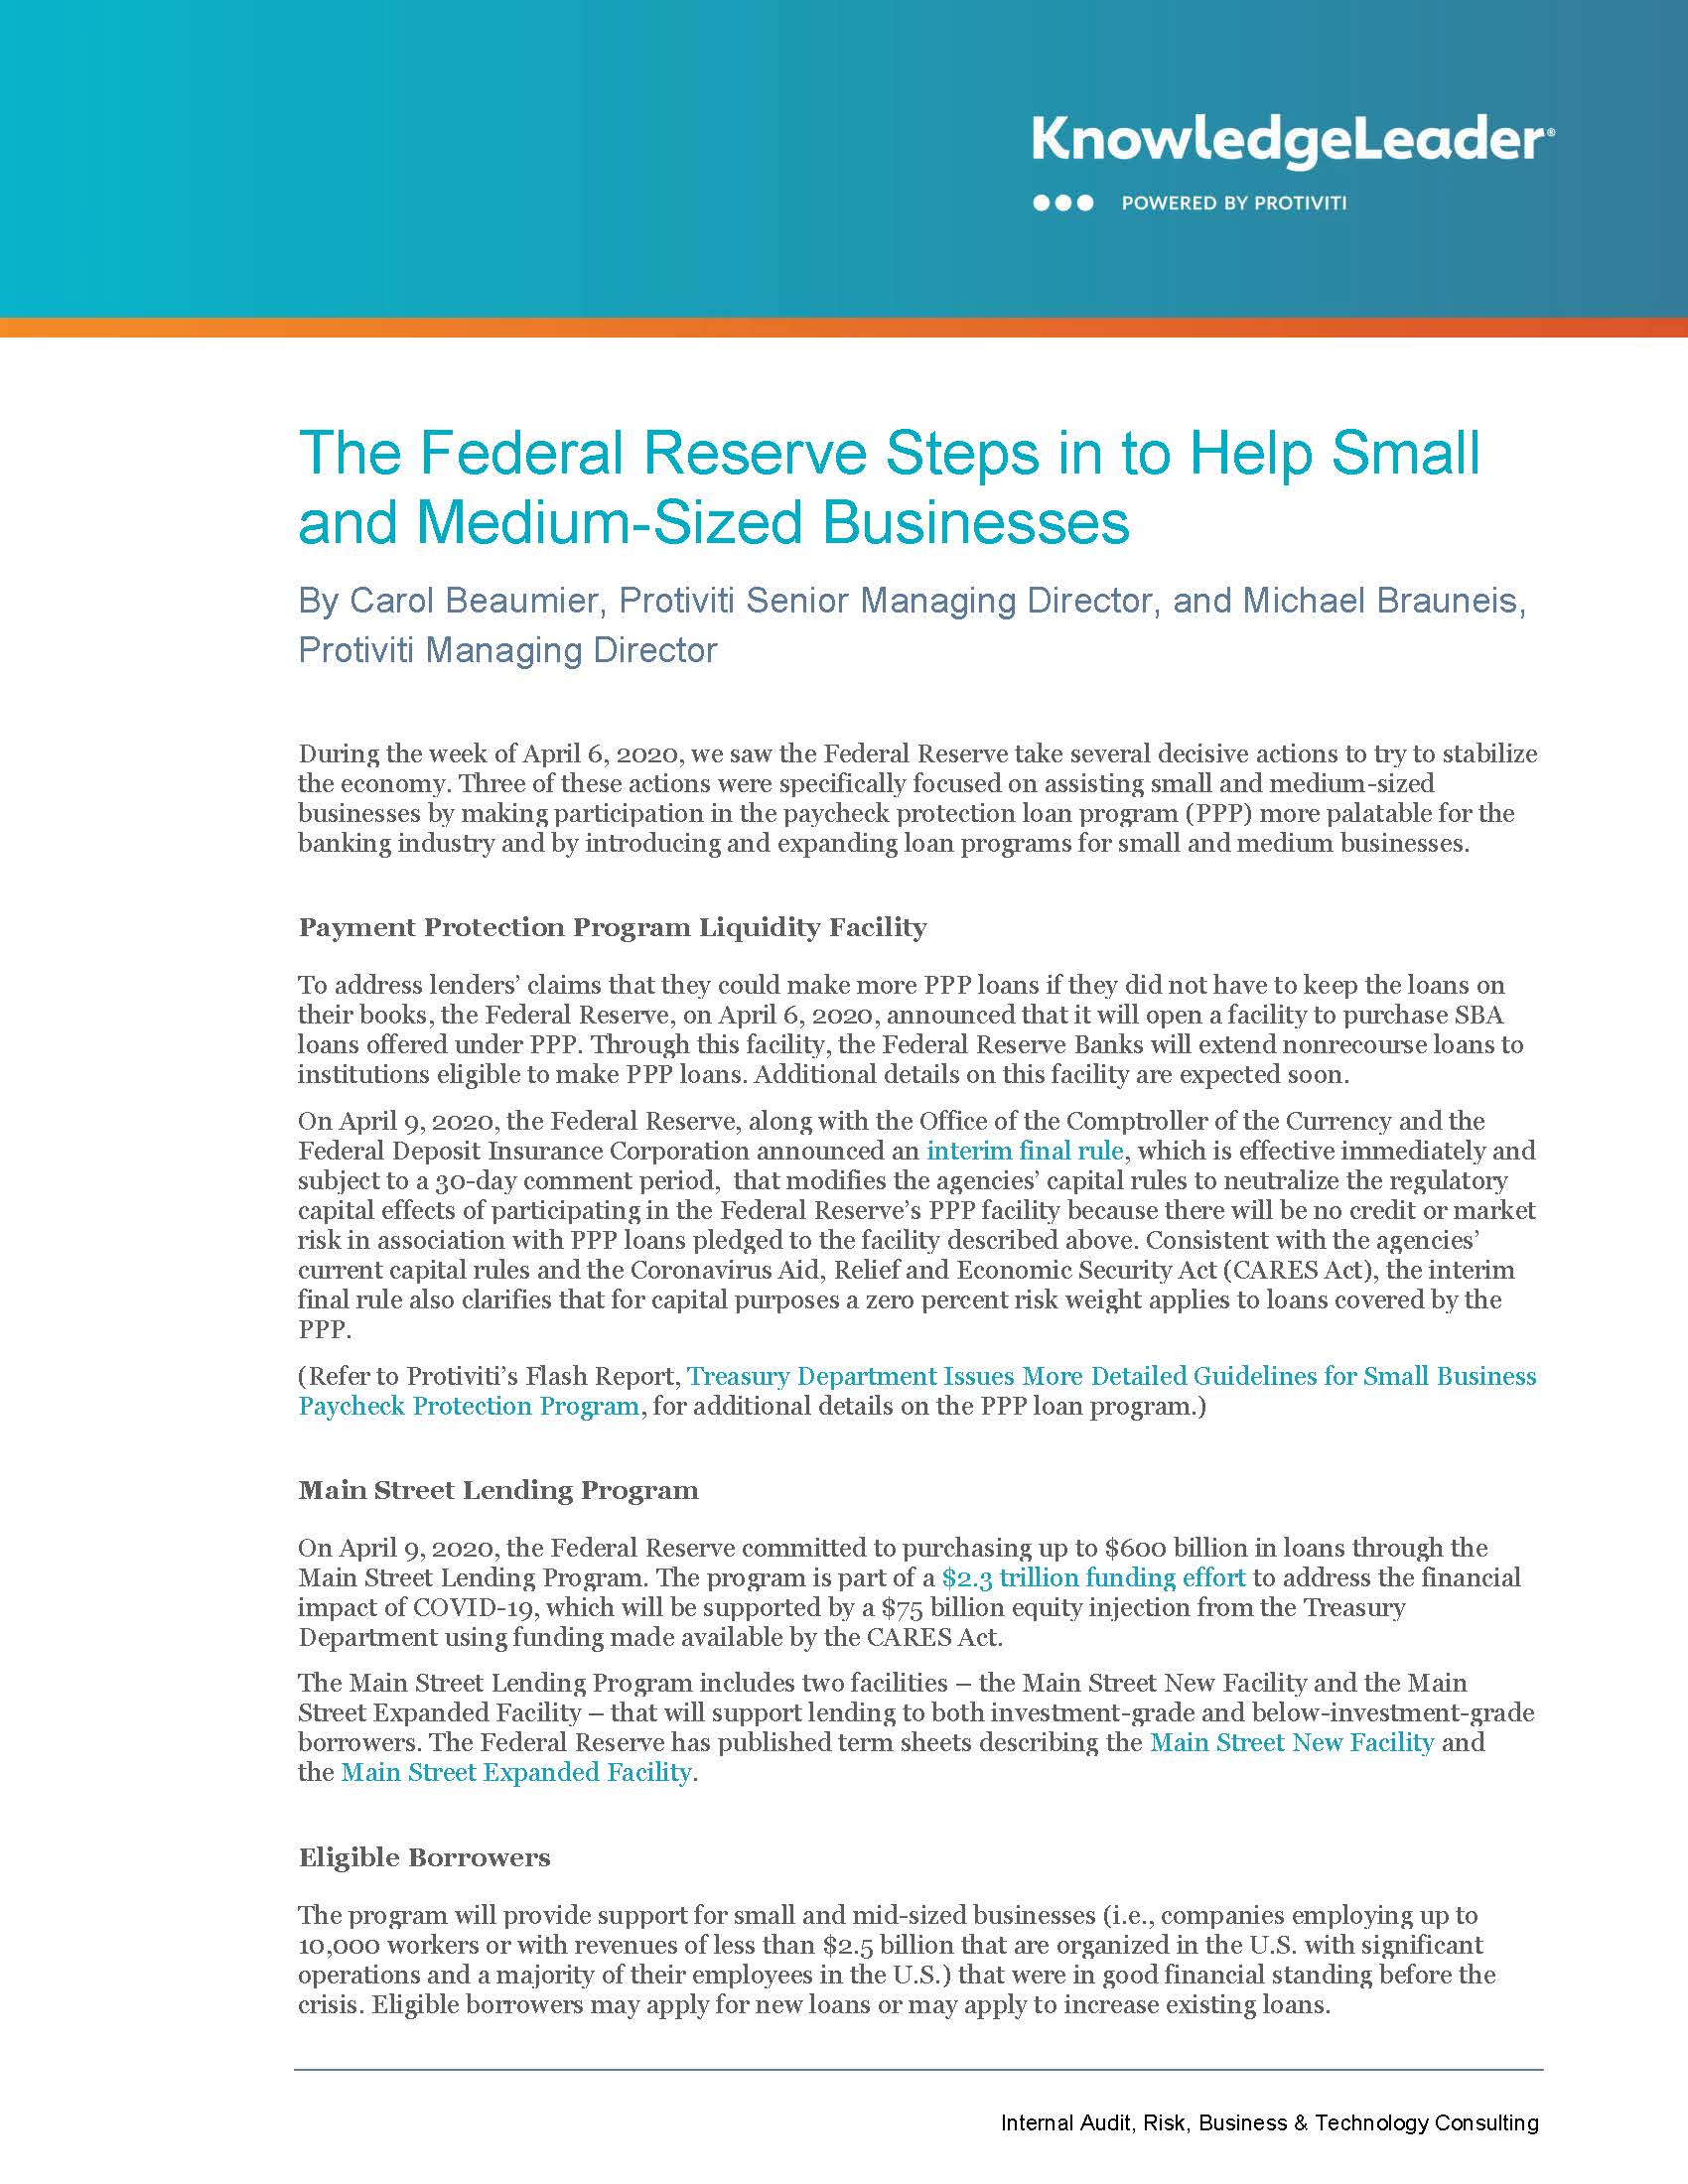 Screenshot of first page of The Federal Reserve Steps in to Help Small and Medium-Sized Businesses